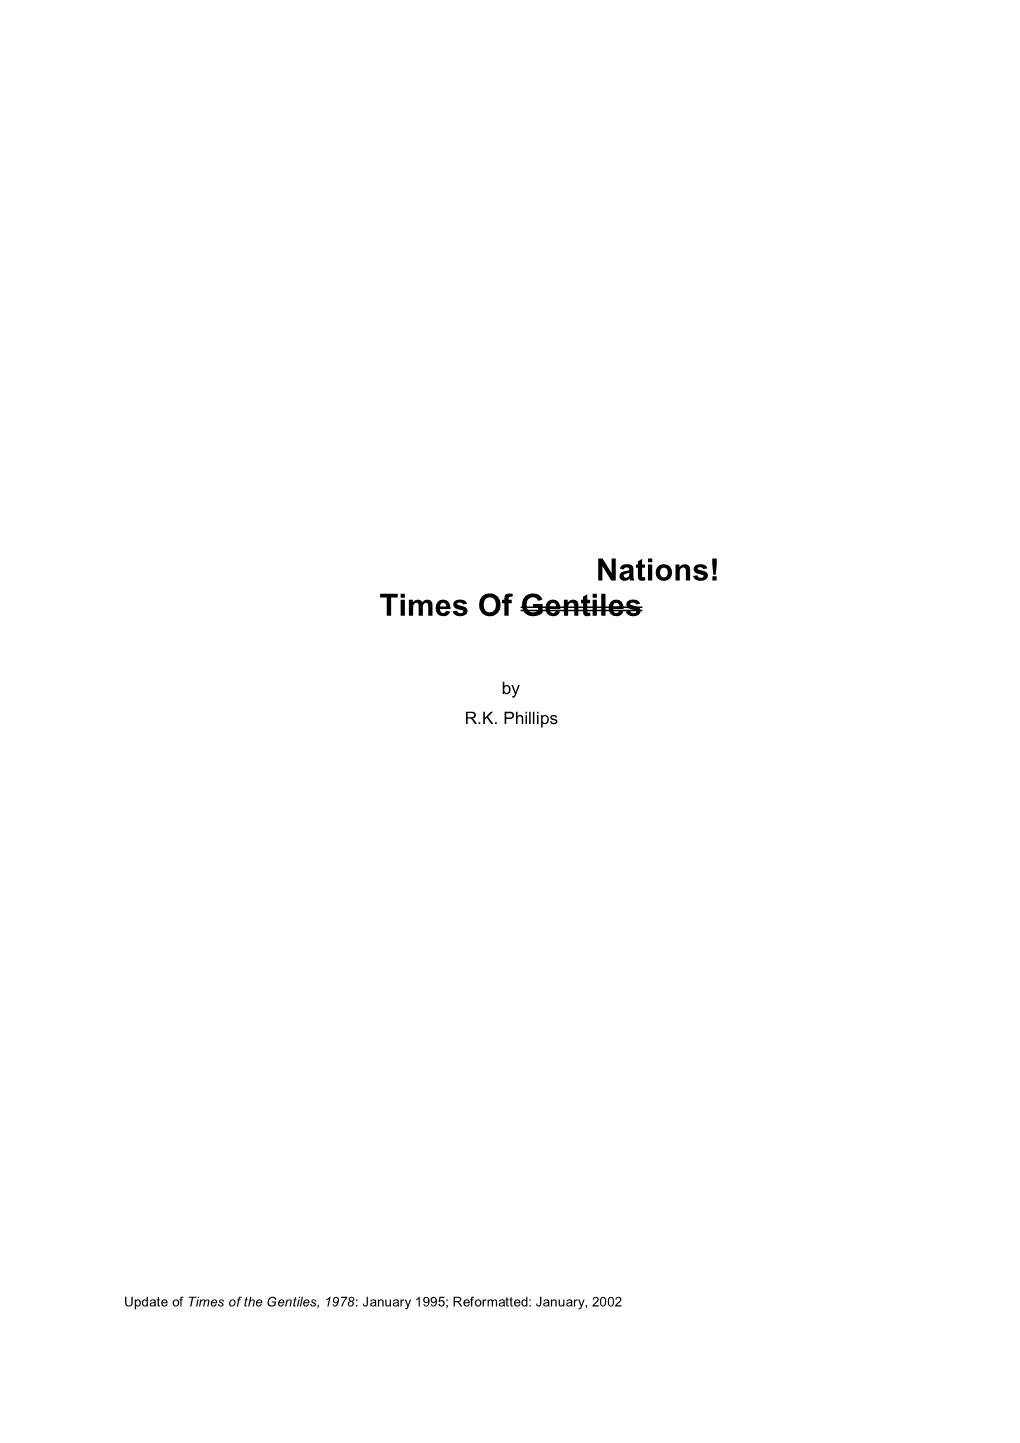 Times of Nations